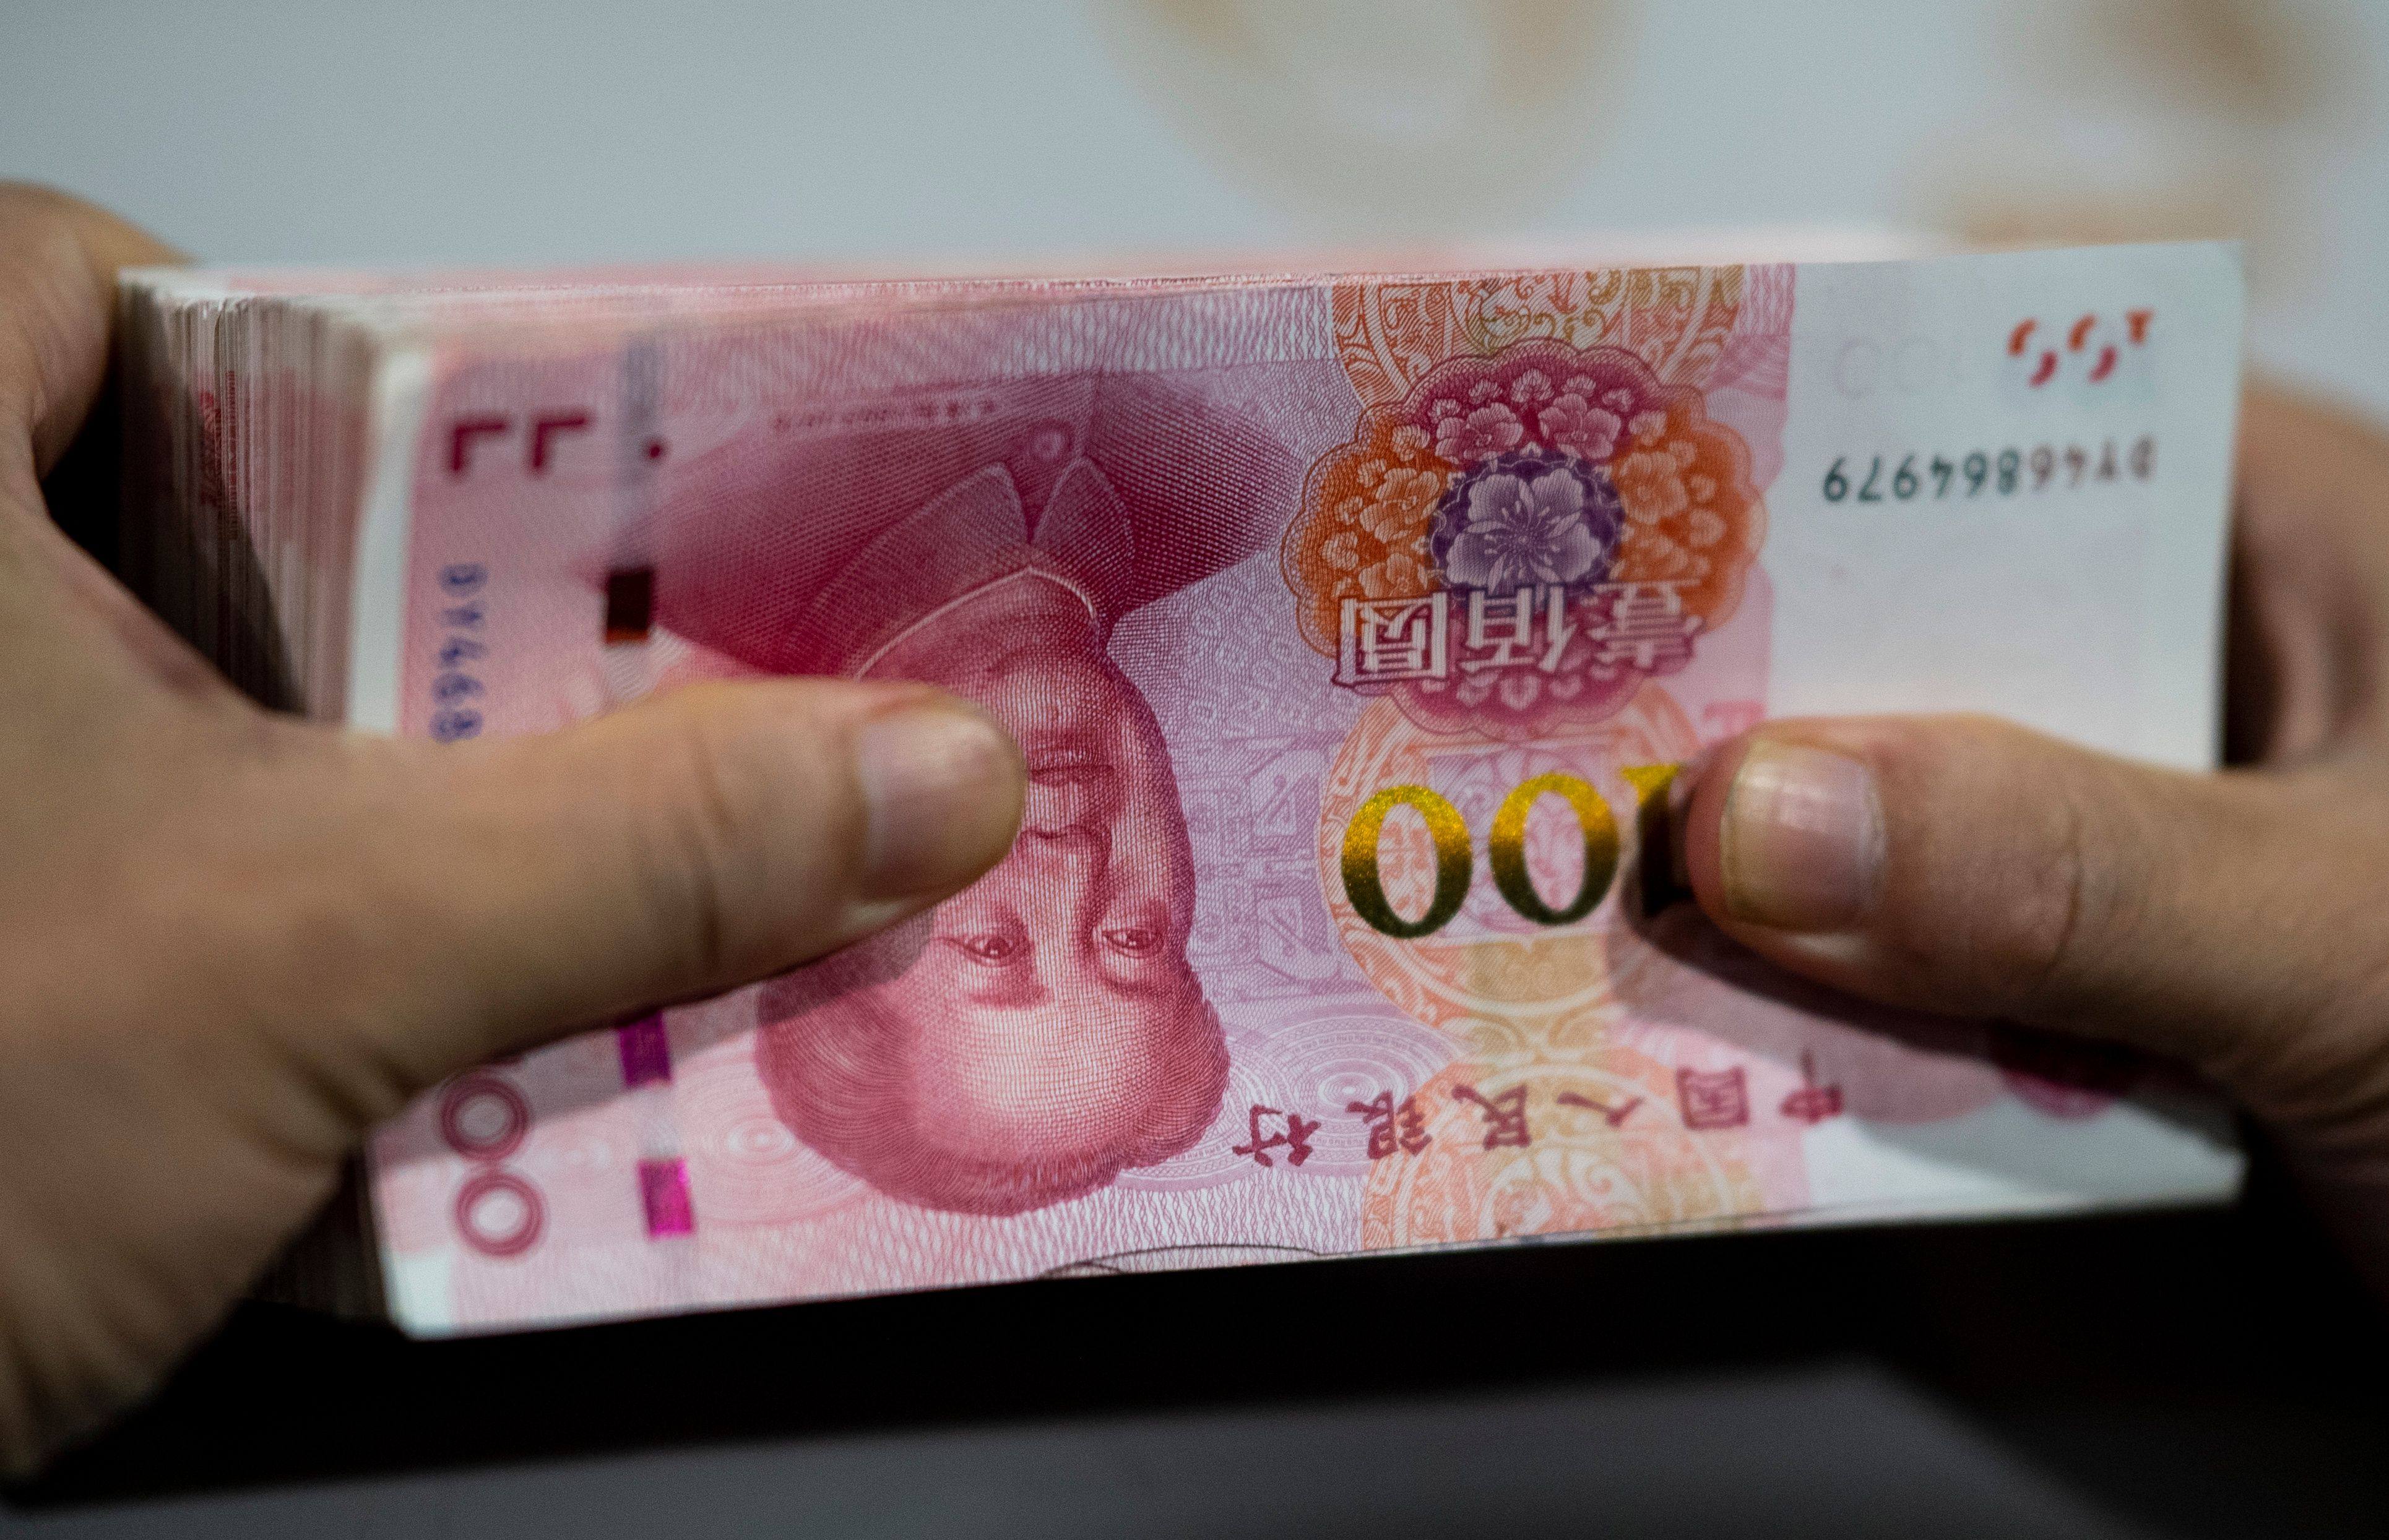 A divergence in monetary policies between the US and China has made Beijing wary about easing its monetary operations this year. Photo: AFP